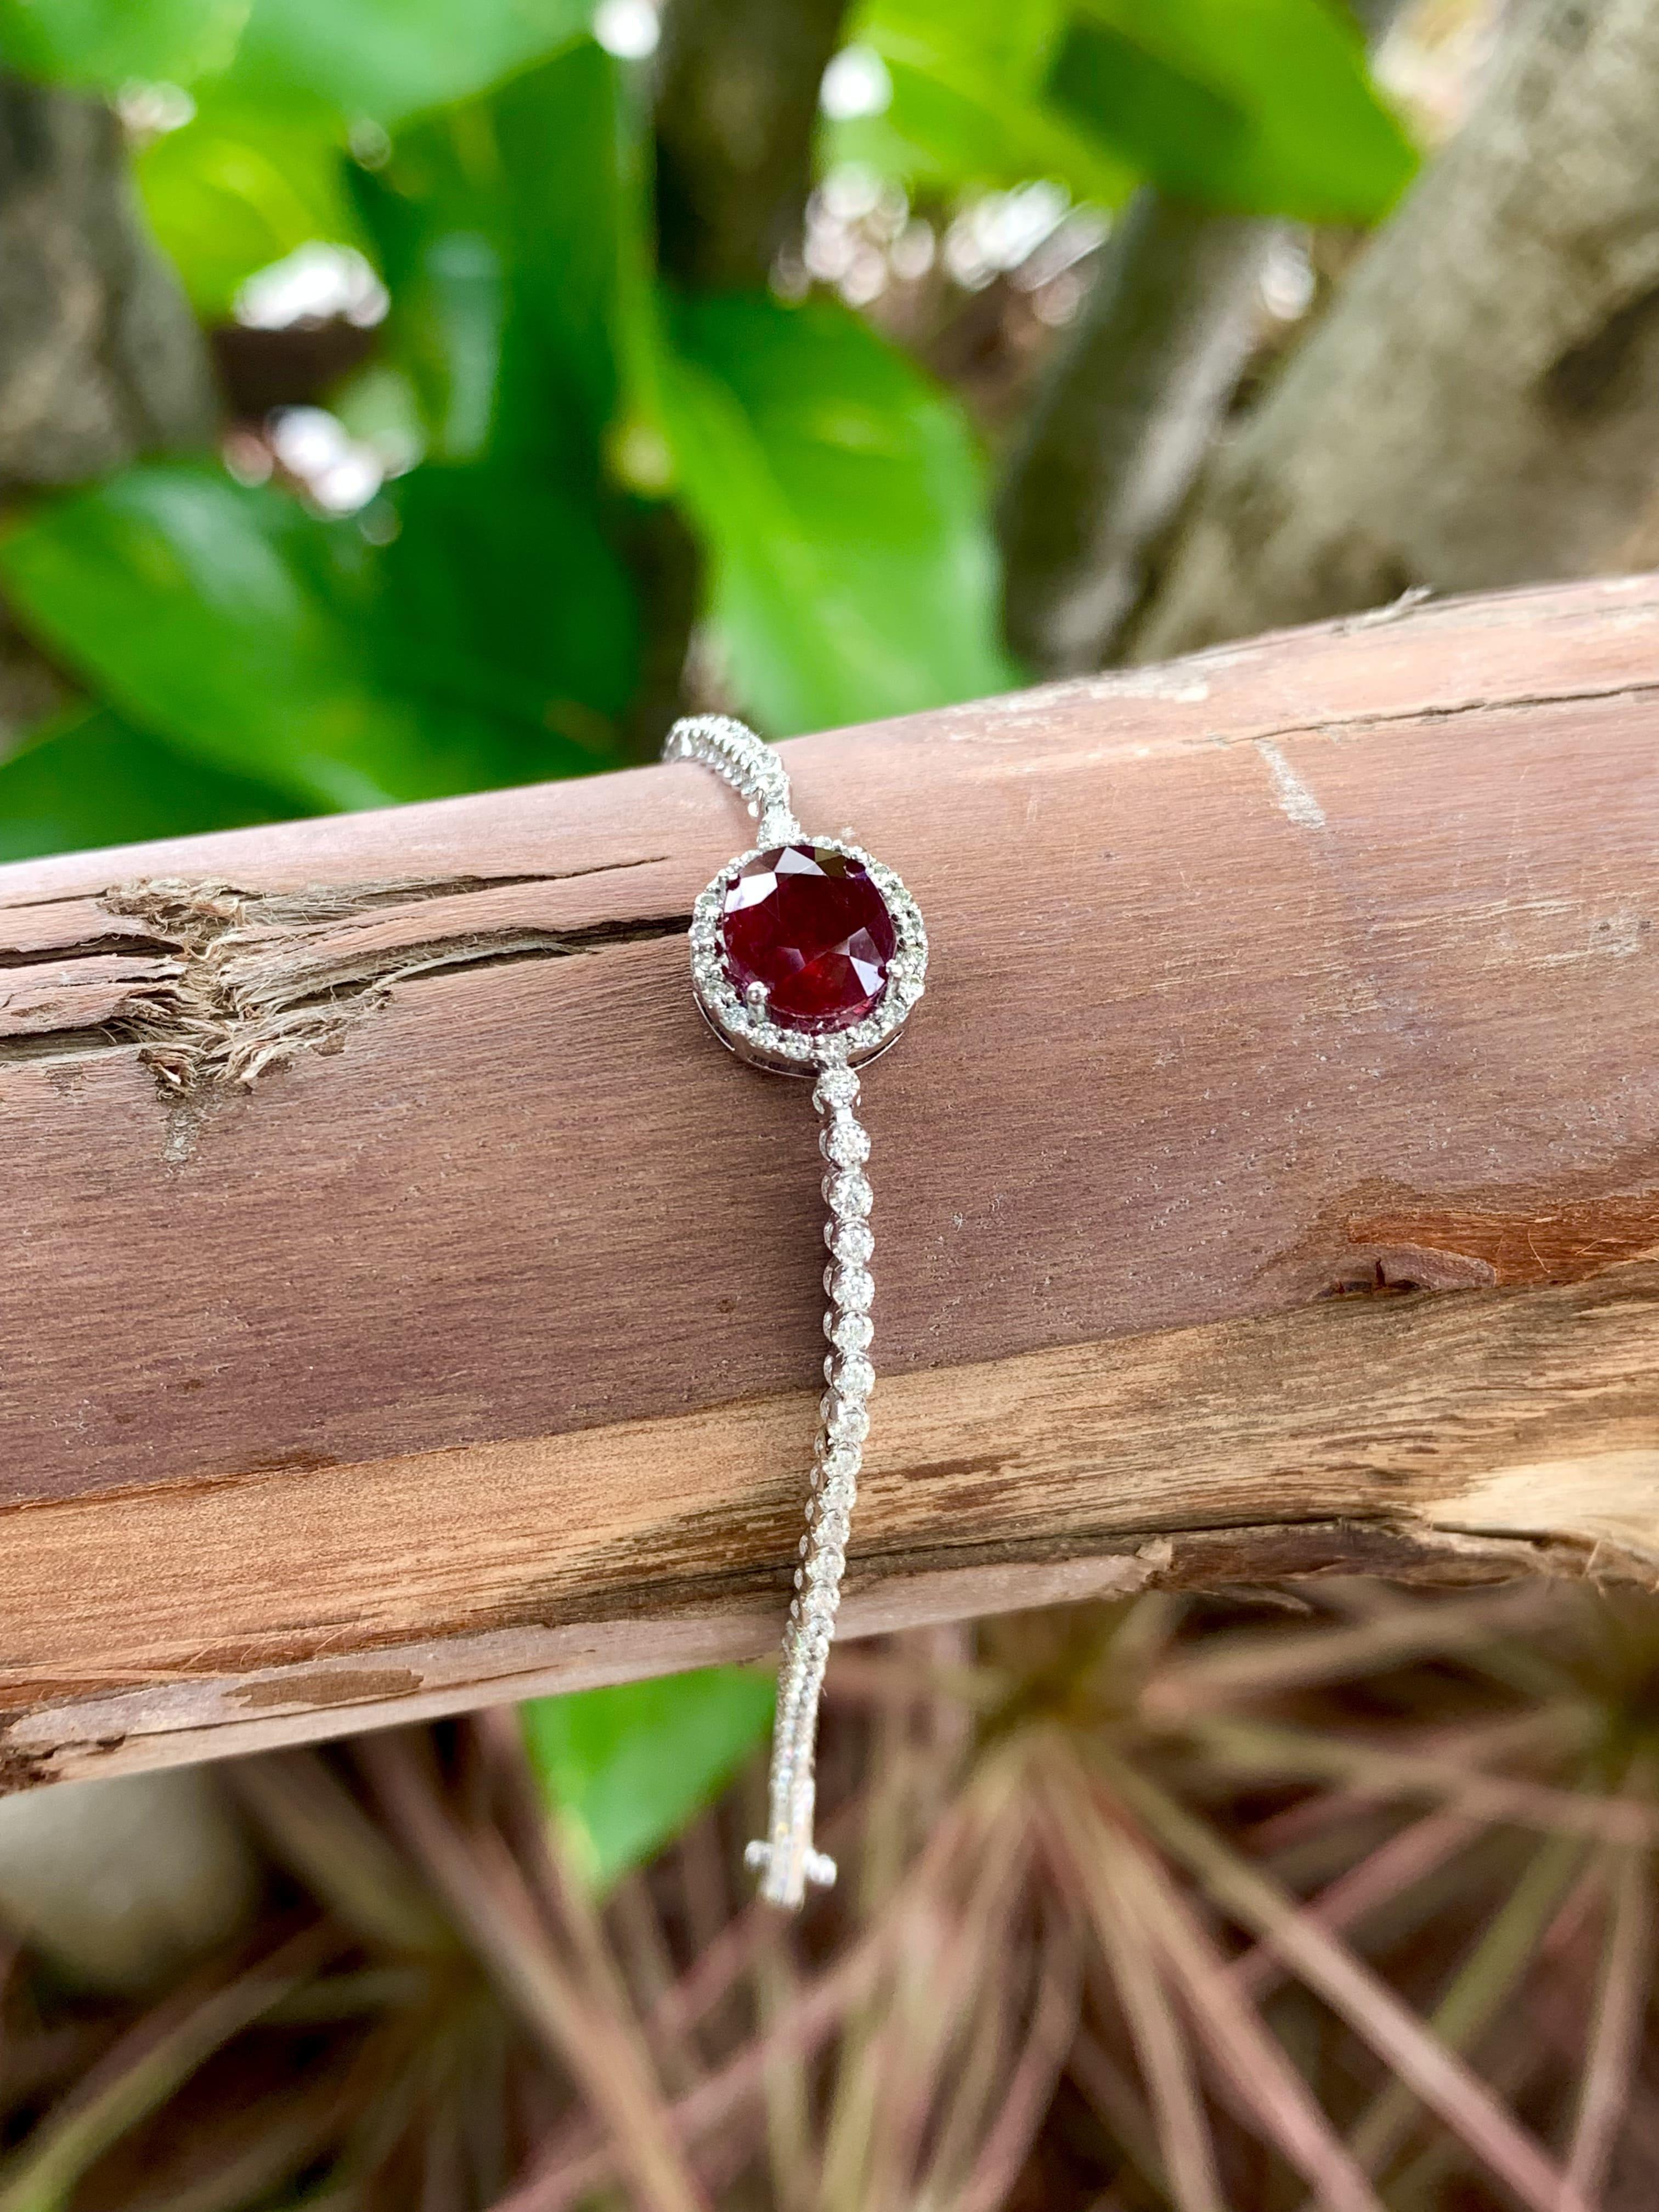 A gorgeous piece of jewellery, behold this newly-crafted gemstone bracelet that radiates unparalleled elegance with its mesmerizing centerpiece, a magnificent Ruby.

This extraordinary bracelet showcases a resplendent Ruby of remarkable quality,